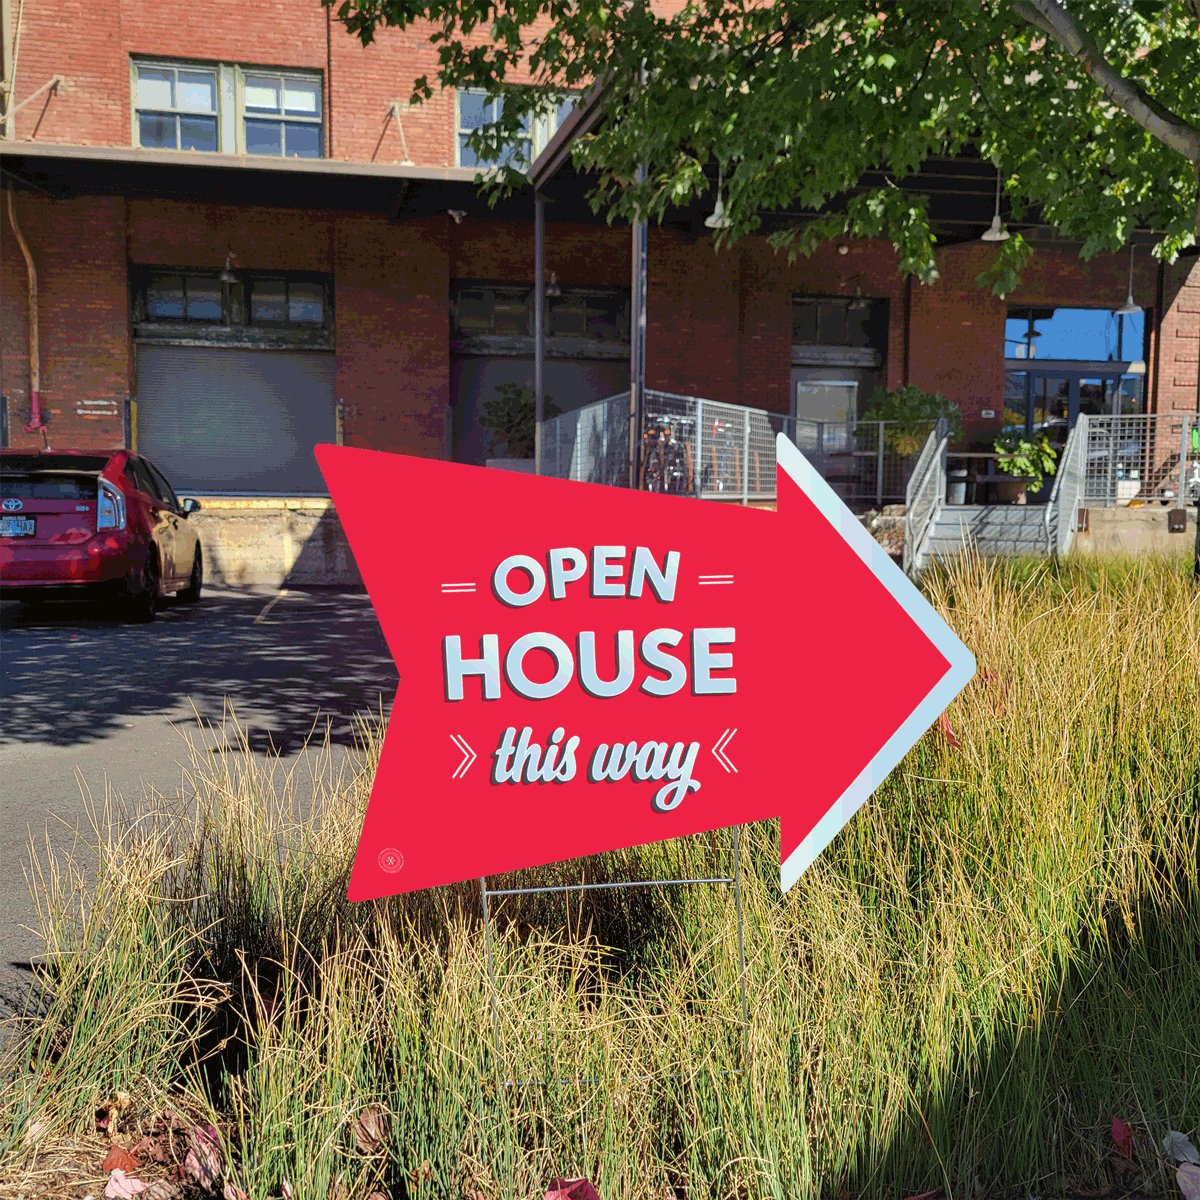 Open House This Way -Fuchsia - Arrow - All Things Real Estate